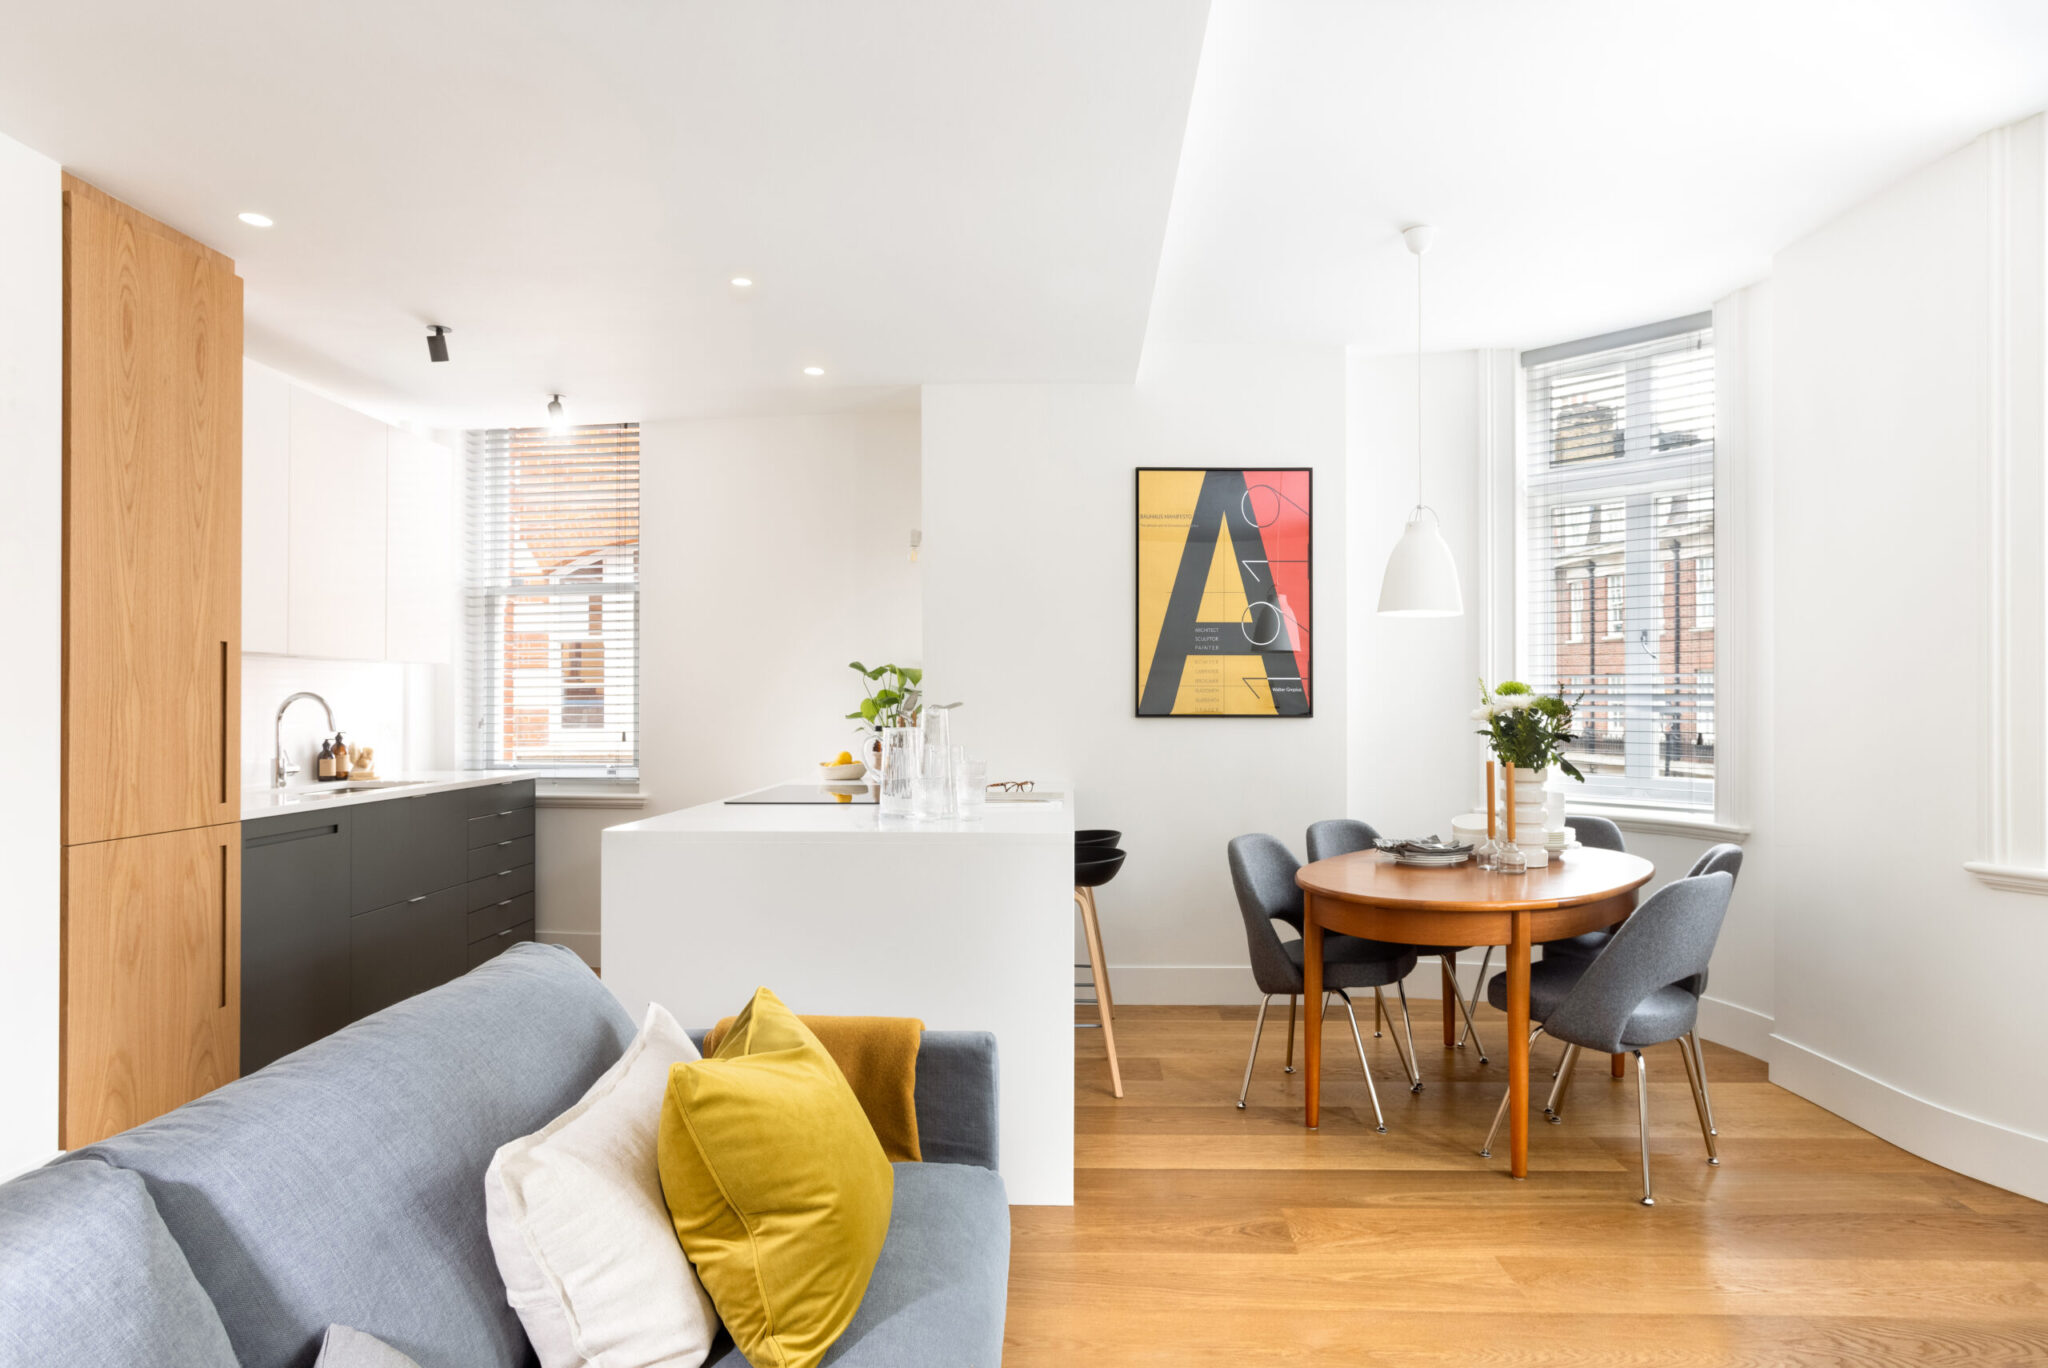 Luxury-Apartments-Marylebone-available-for-short-lets!-Book-The-Marlo-Serviced-Accommodation-Near-Regents-Park,-Oxford-Street-and-Soho-now!-urban-Stay